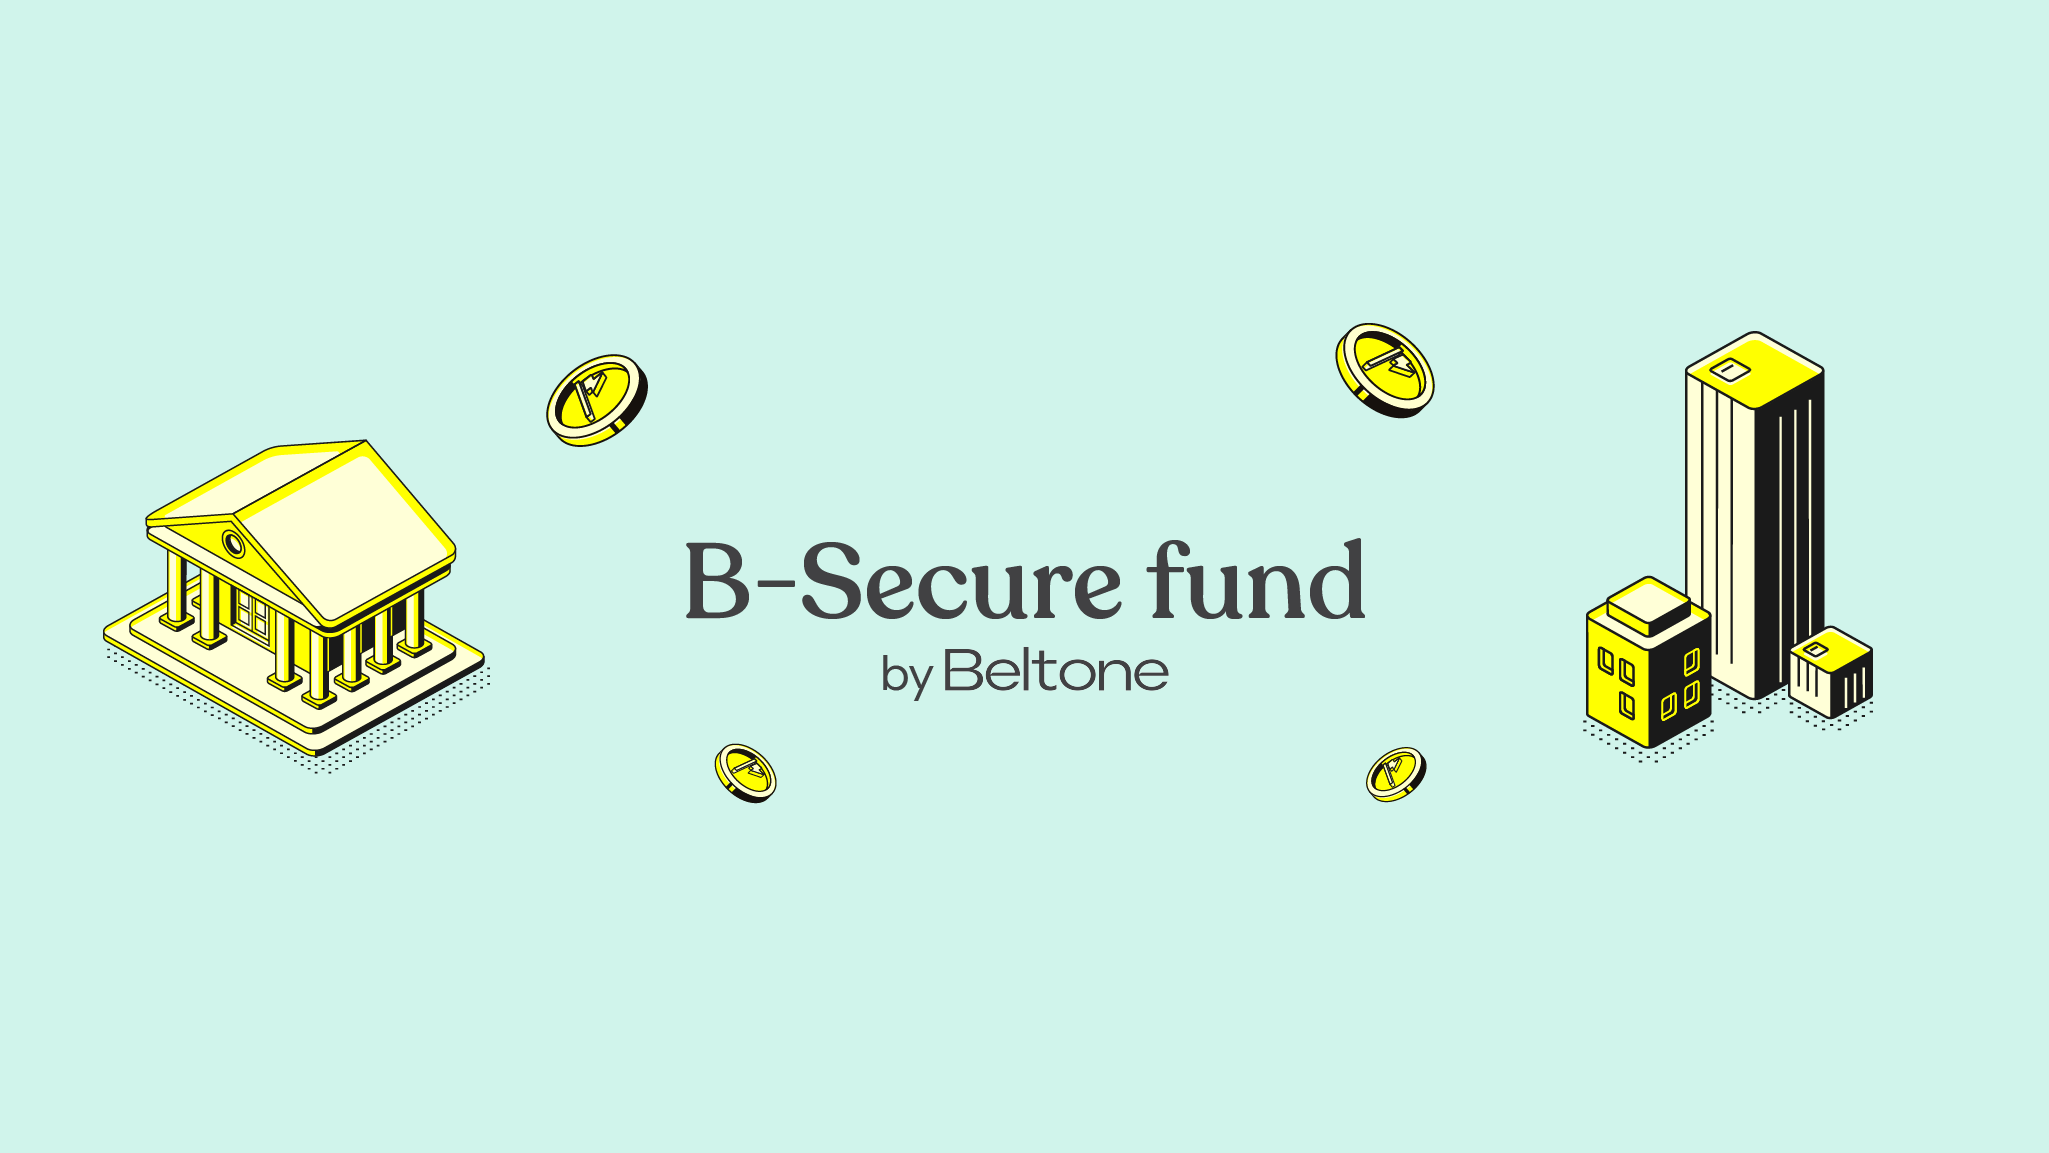 B-Secure savings fund is now on Thndr